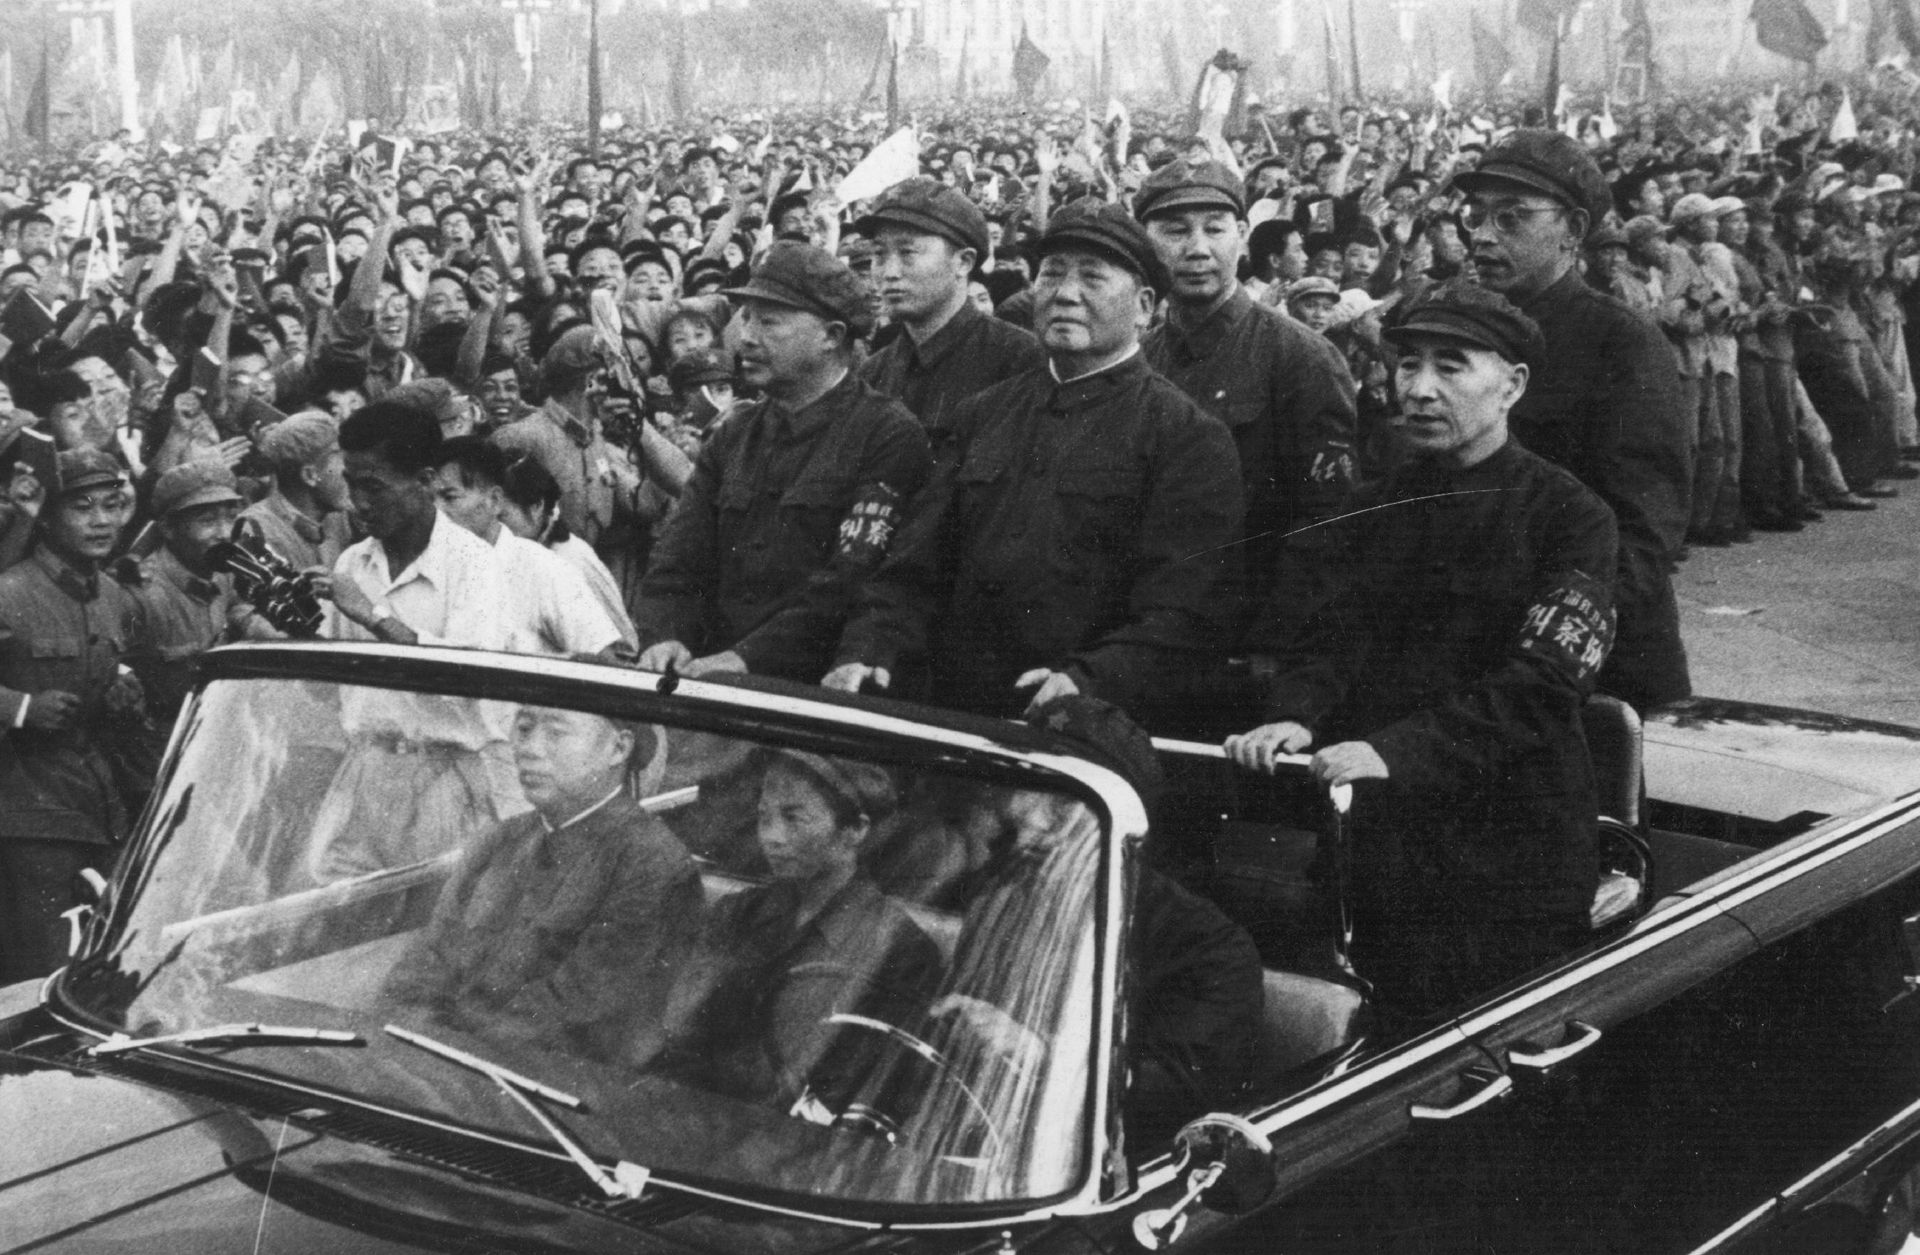 Chinese leader Mao Zedong accompanied by second-in-command Lin Biao passes through a 1966 Tiananmen Square rally.